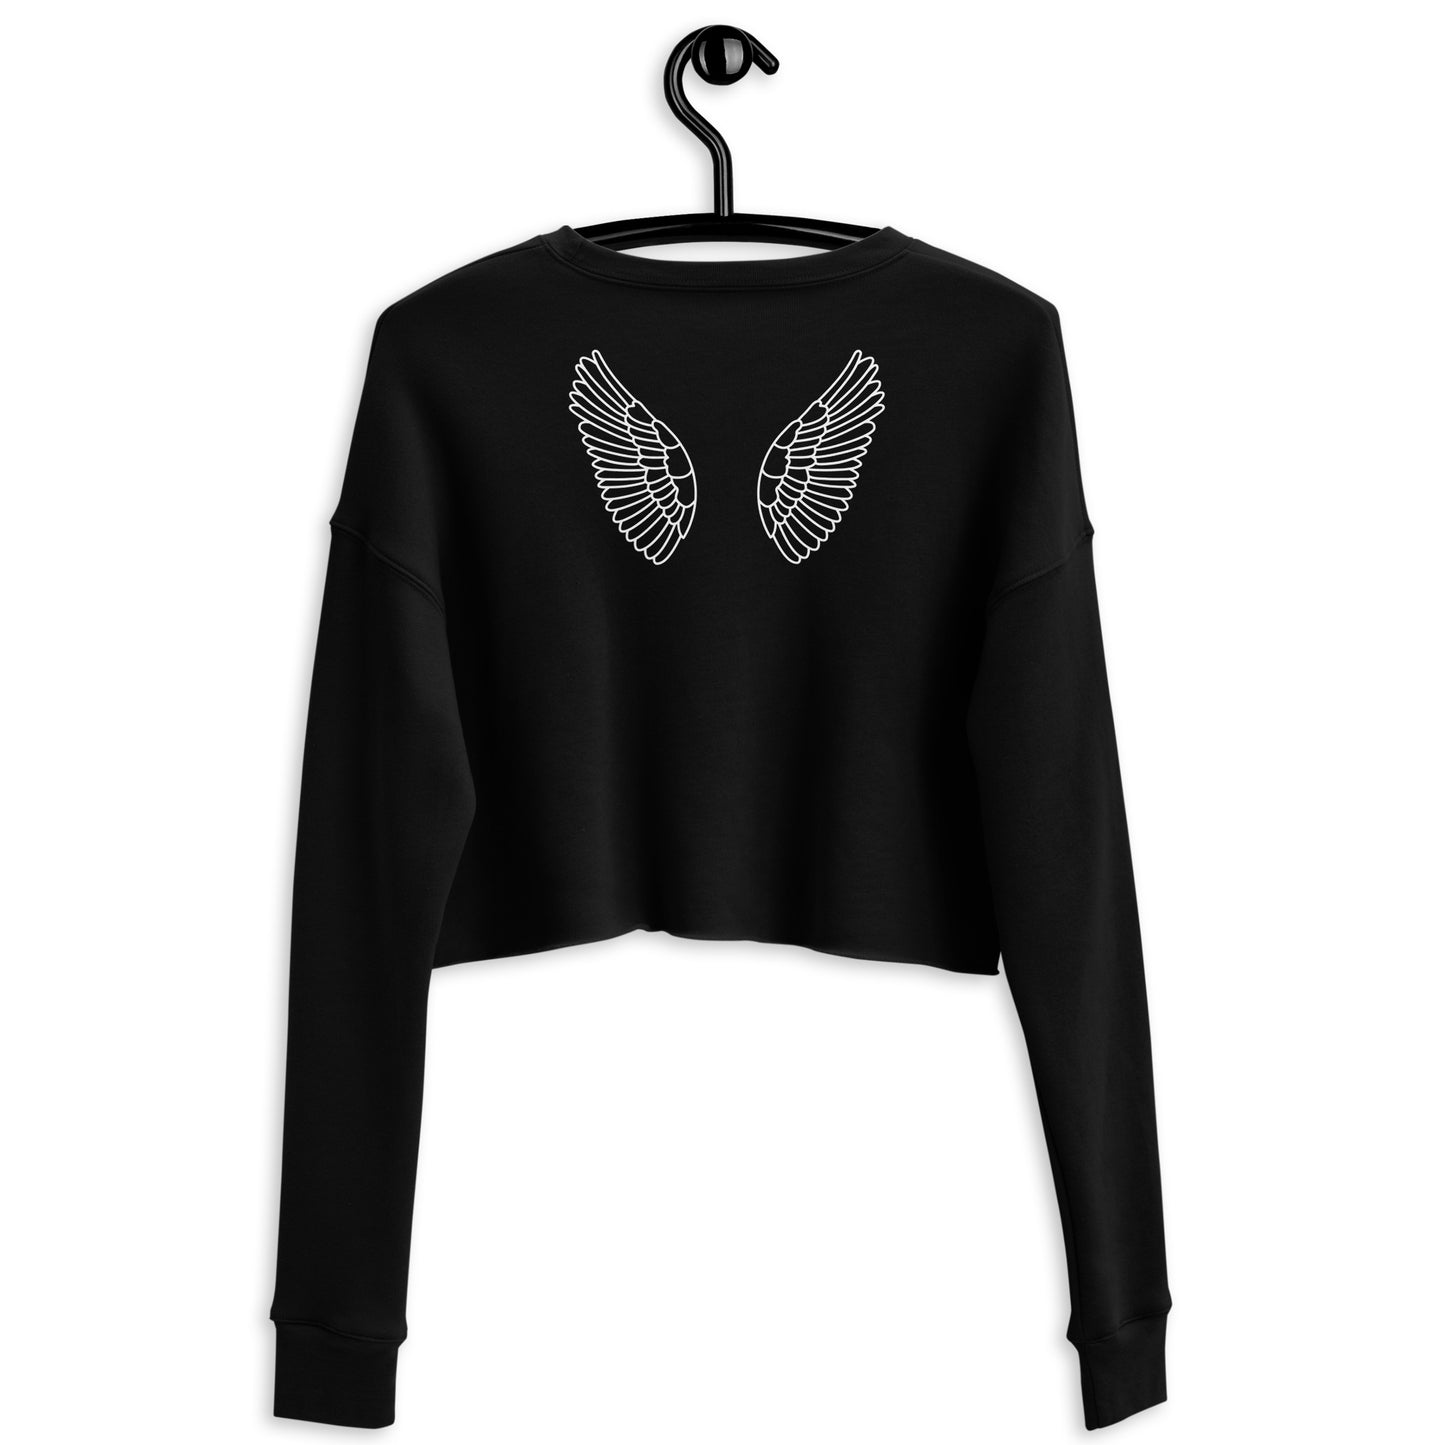 Angel | Women's Cropped Crewneck | Embroidered